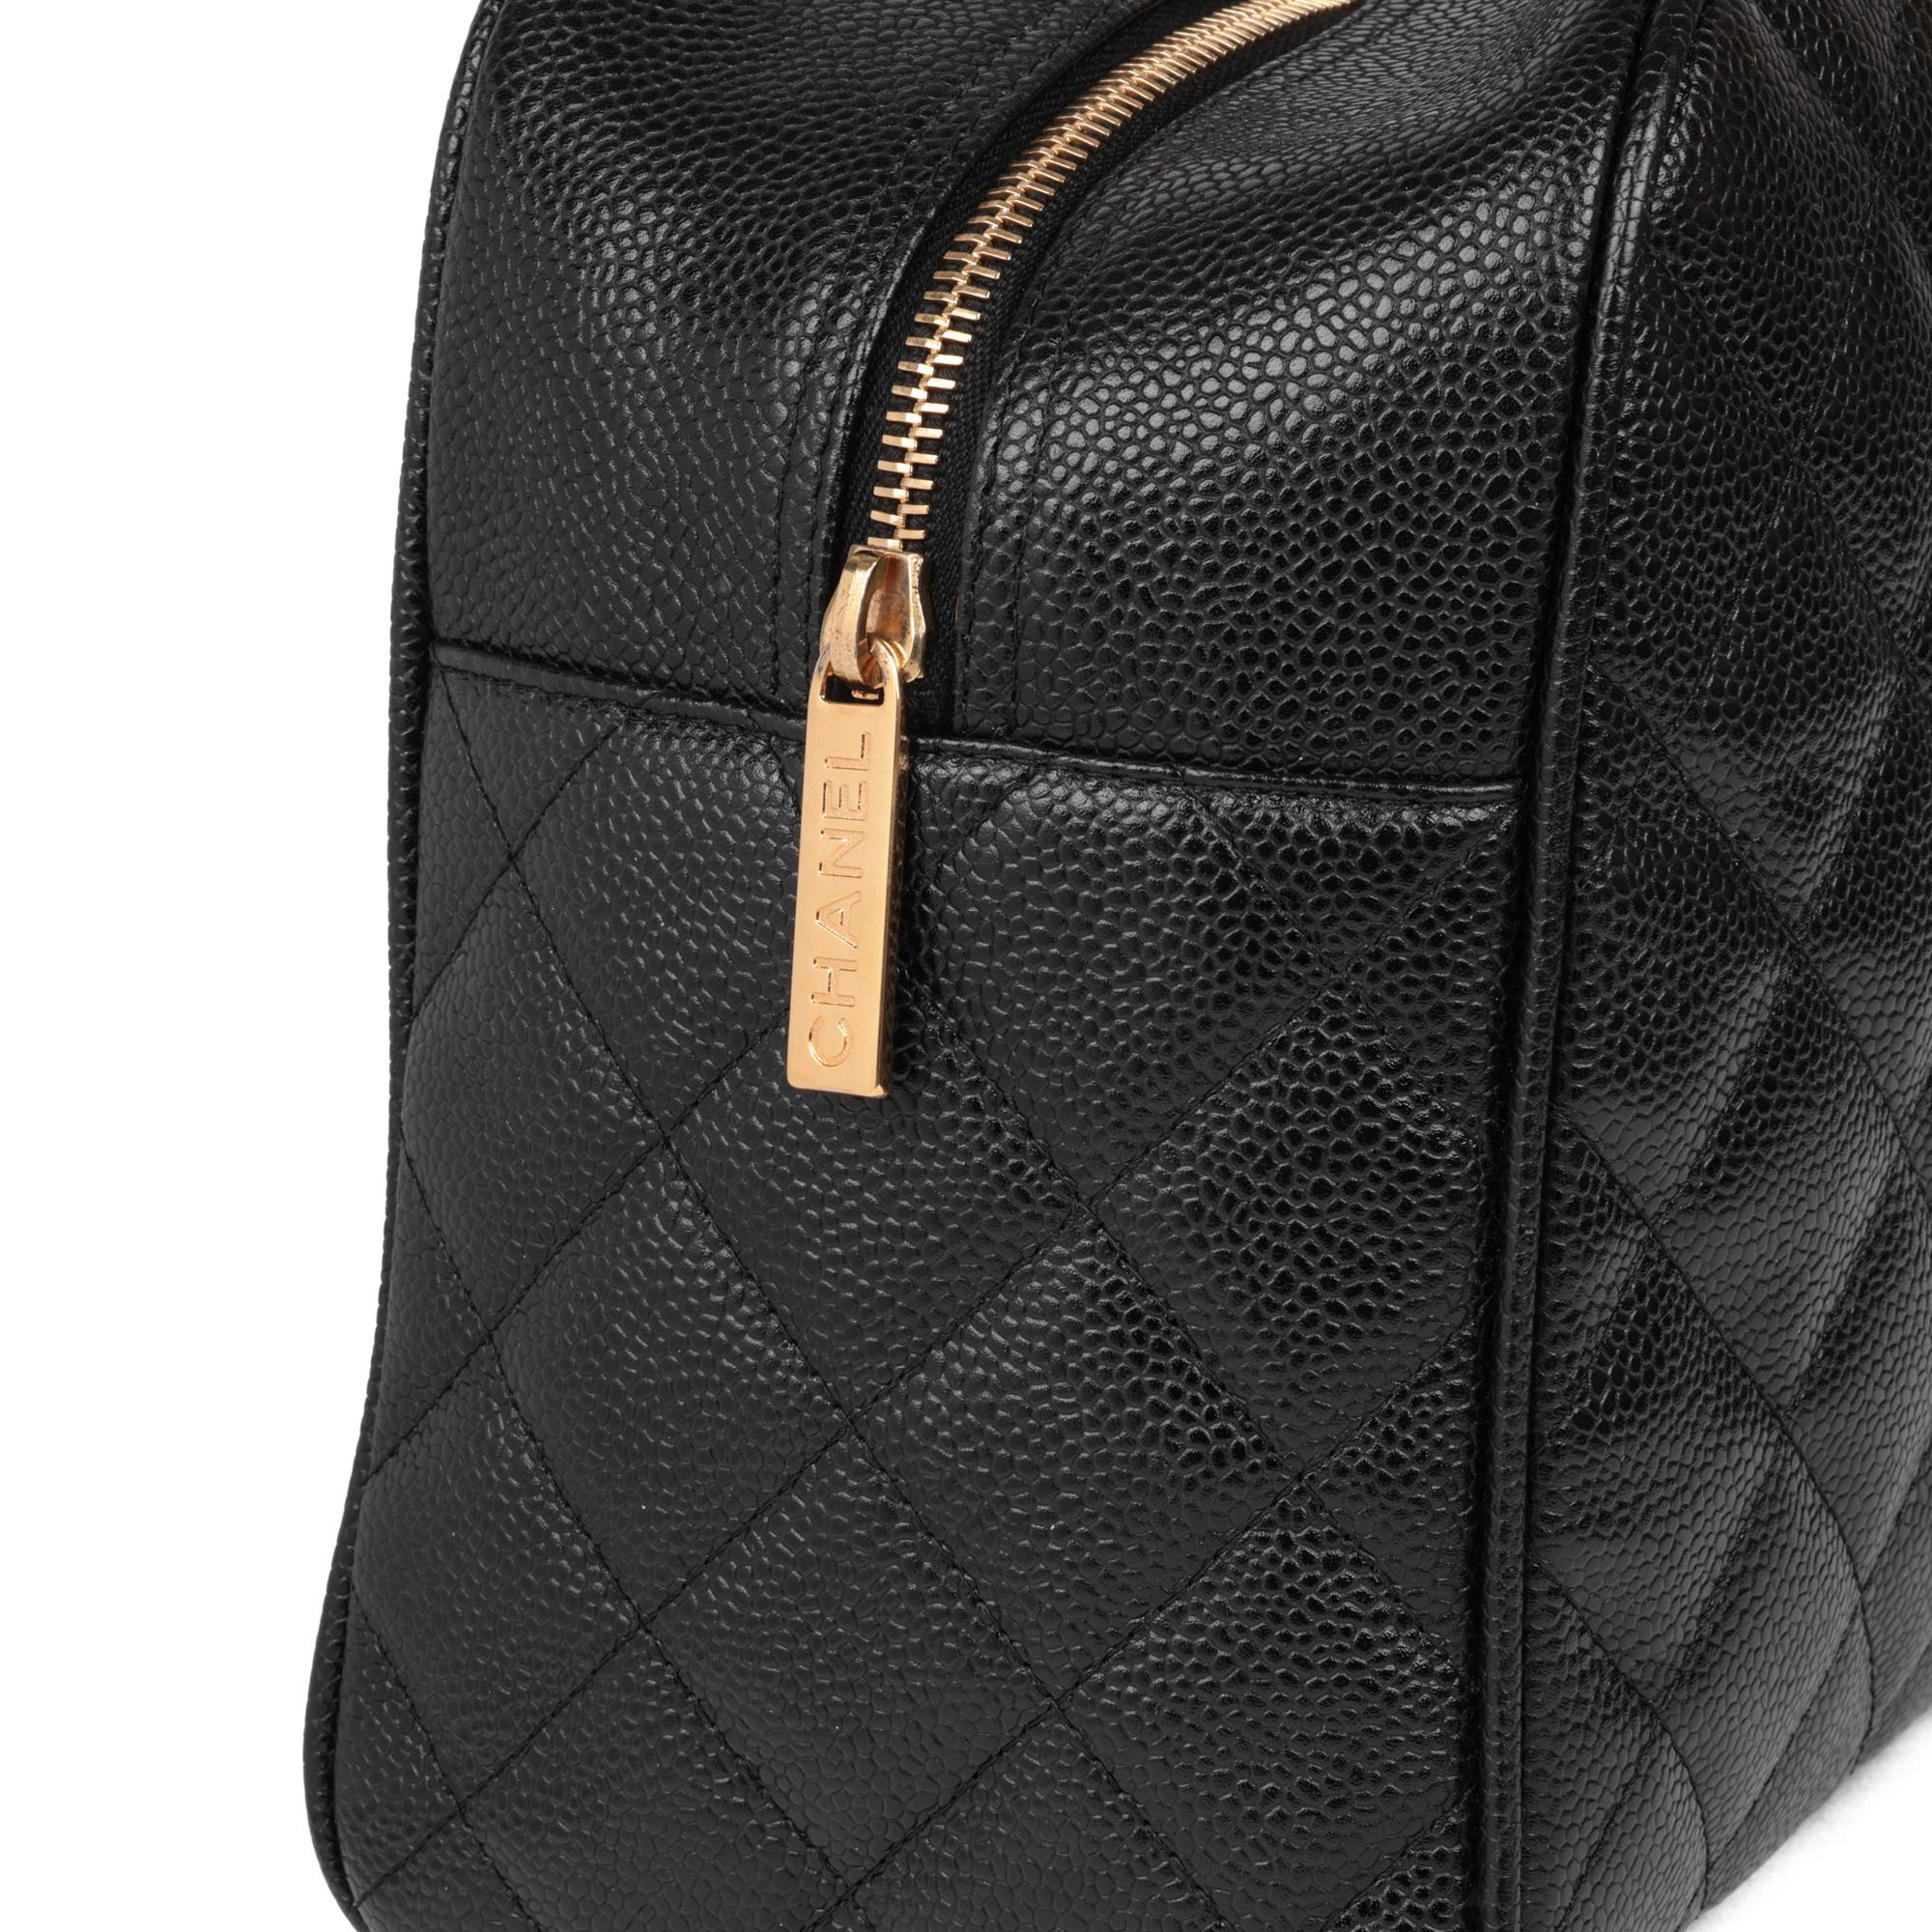 CHANEL Black Quilted Caviar Leather Boston Bag 2